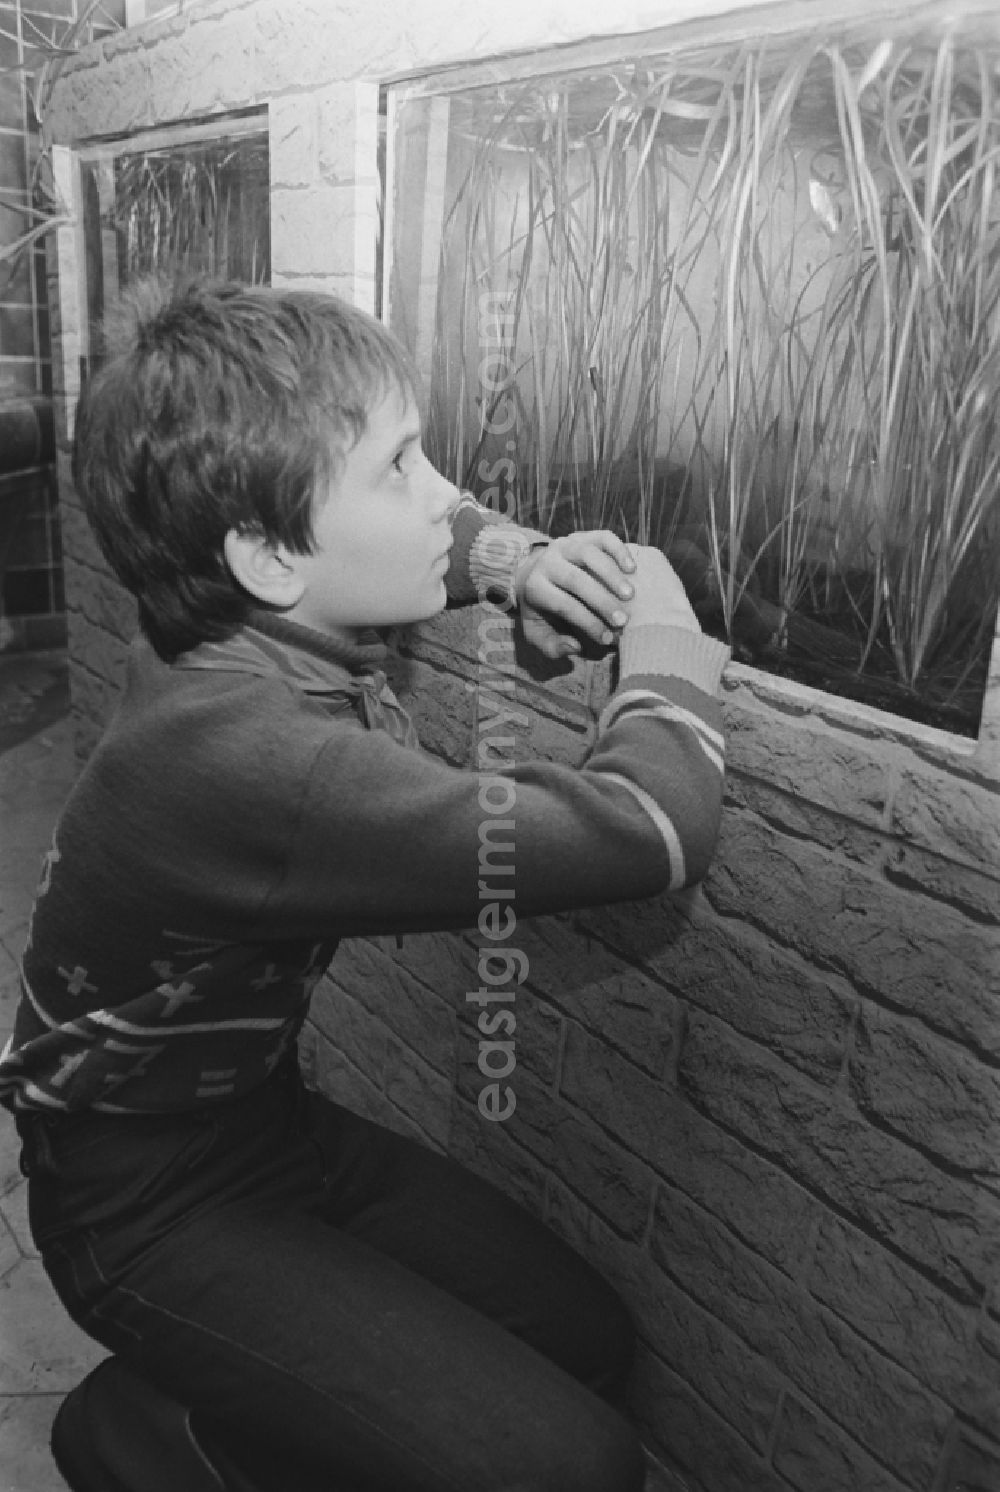 GDR picture archive: Laubusch - Secondary School OS Dr. Richard Sorge at Laubuscher Markt in the Upper Lusatian workers settlement Gartenstadt Erika in Laubusch in the state of Saxony on the territory of the former GDR, German Democratic Republic. Pupil standing in front of an aquarium in the school building